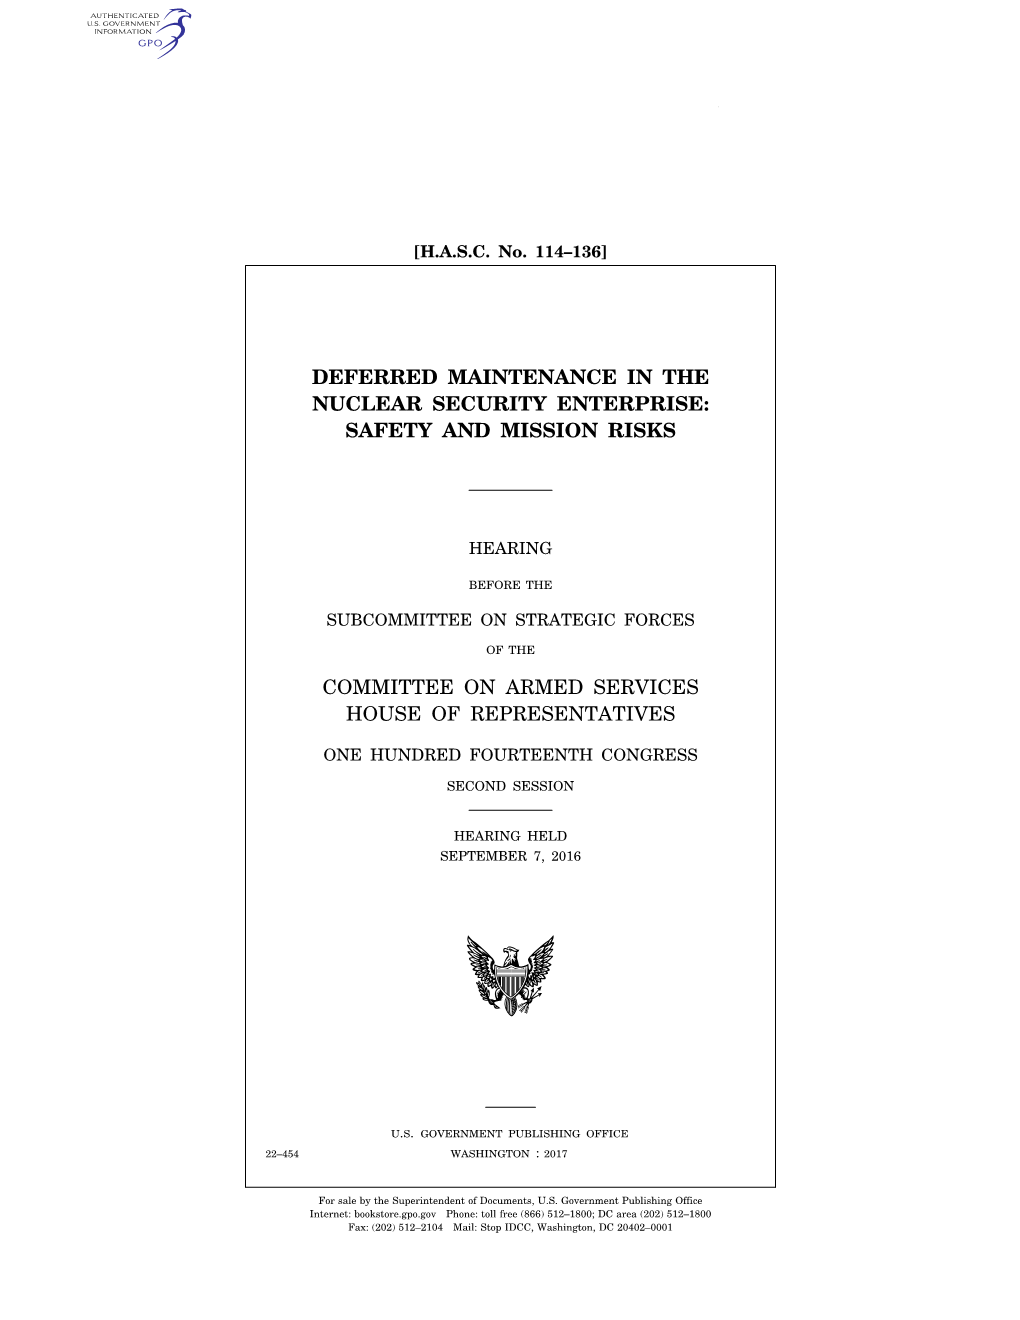 Deferred Maintenance in the Nuclear Security Enterprise: Safety and Mission Risks